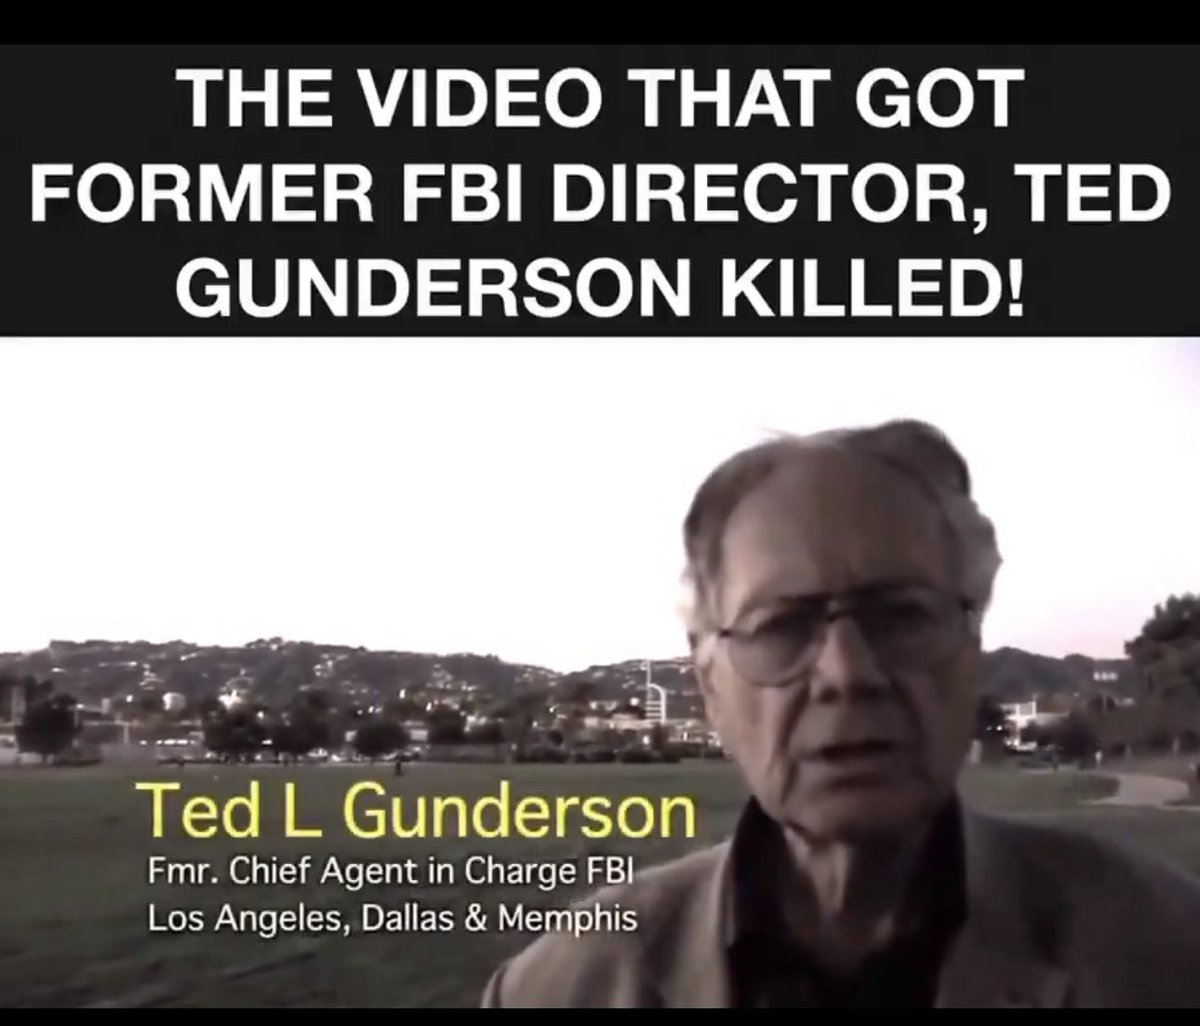 “The death dumps, otherwise known as chemical trails…” - Ted L. Gunderson

👀⬇️ 2:16 min clip on below post. 
#CrimesAgainstHumanity